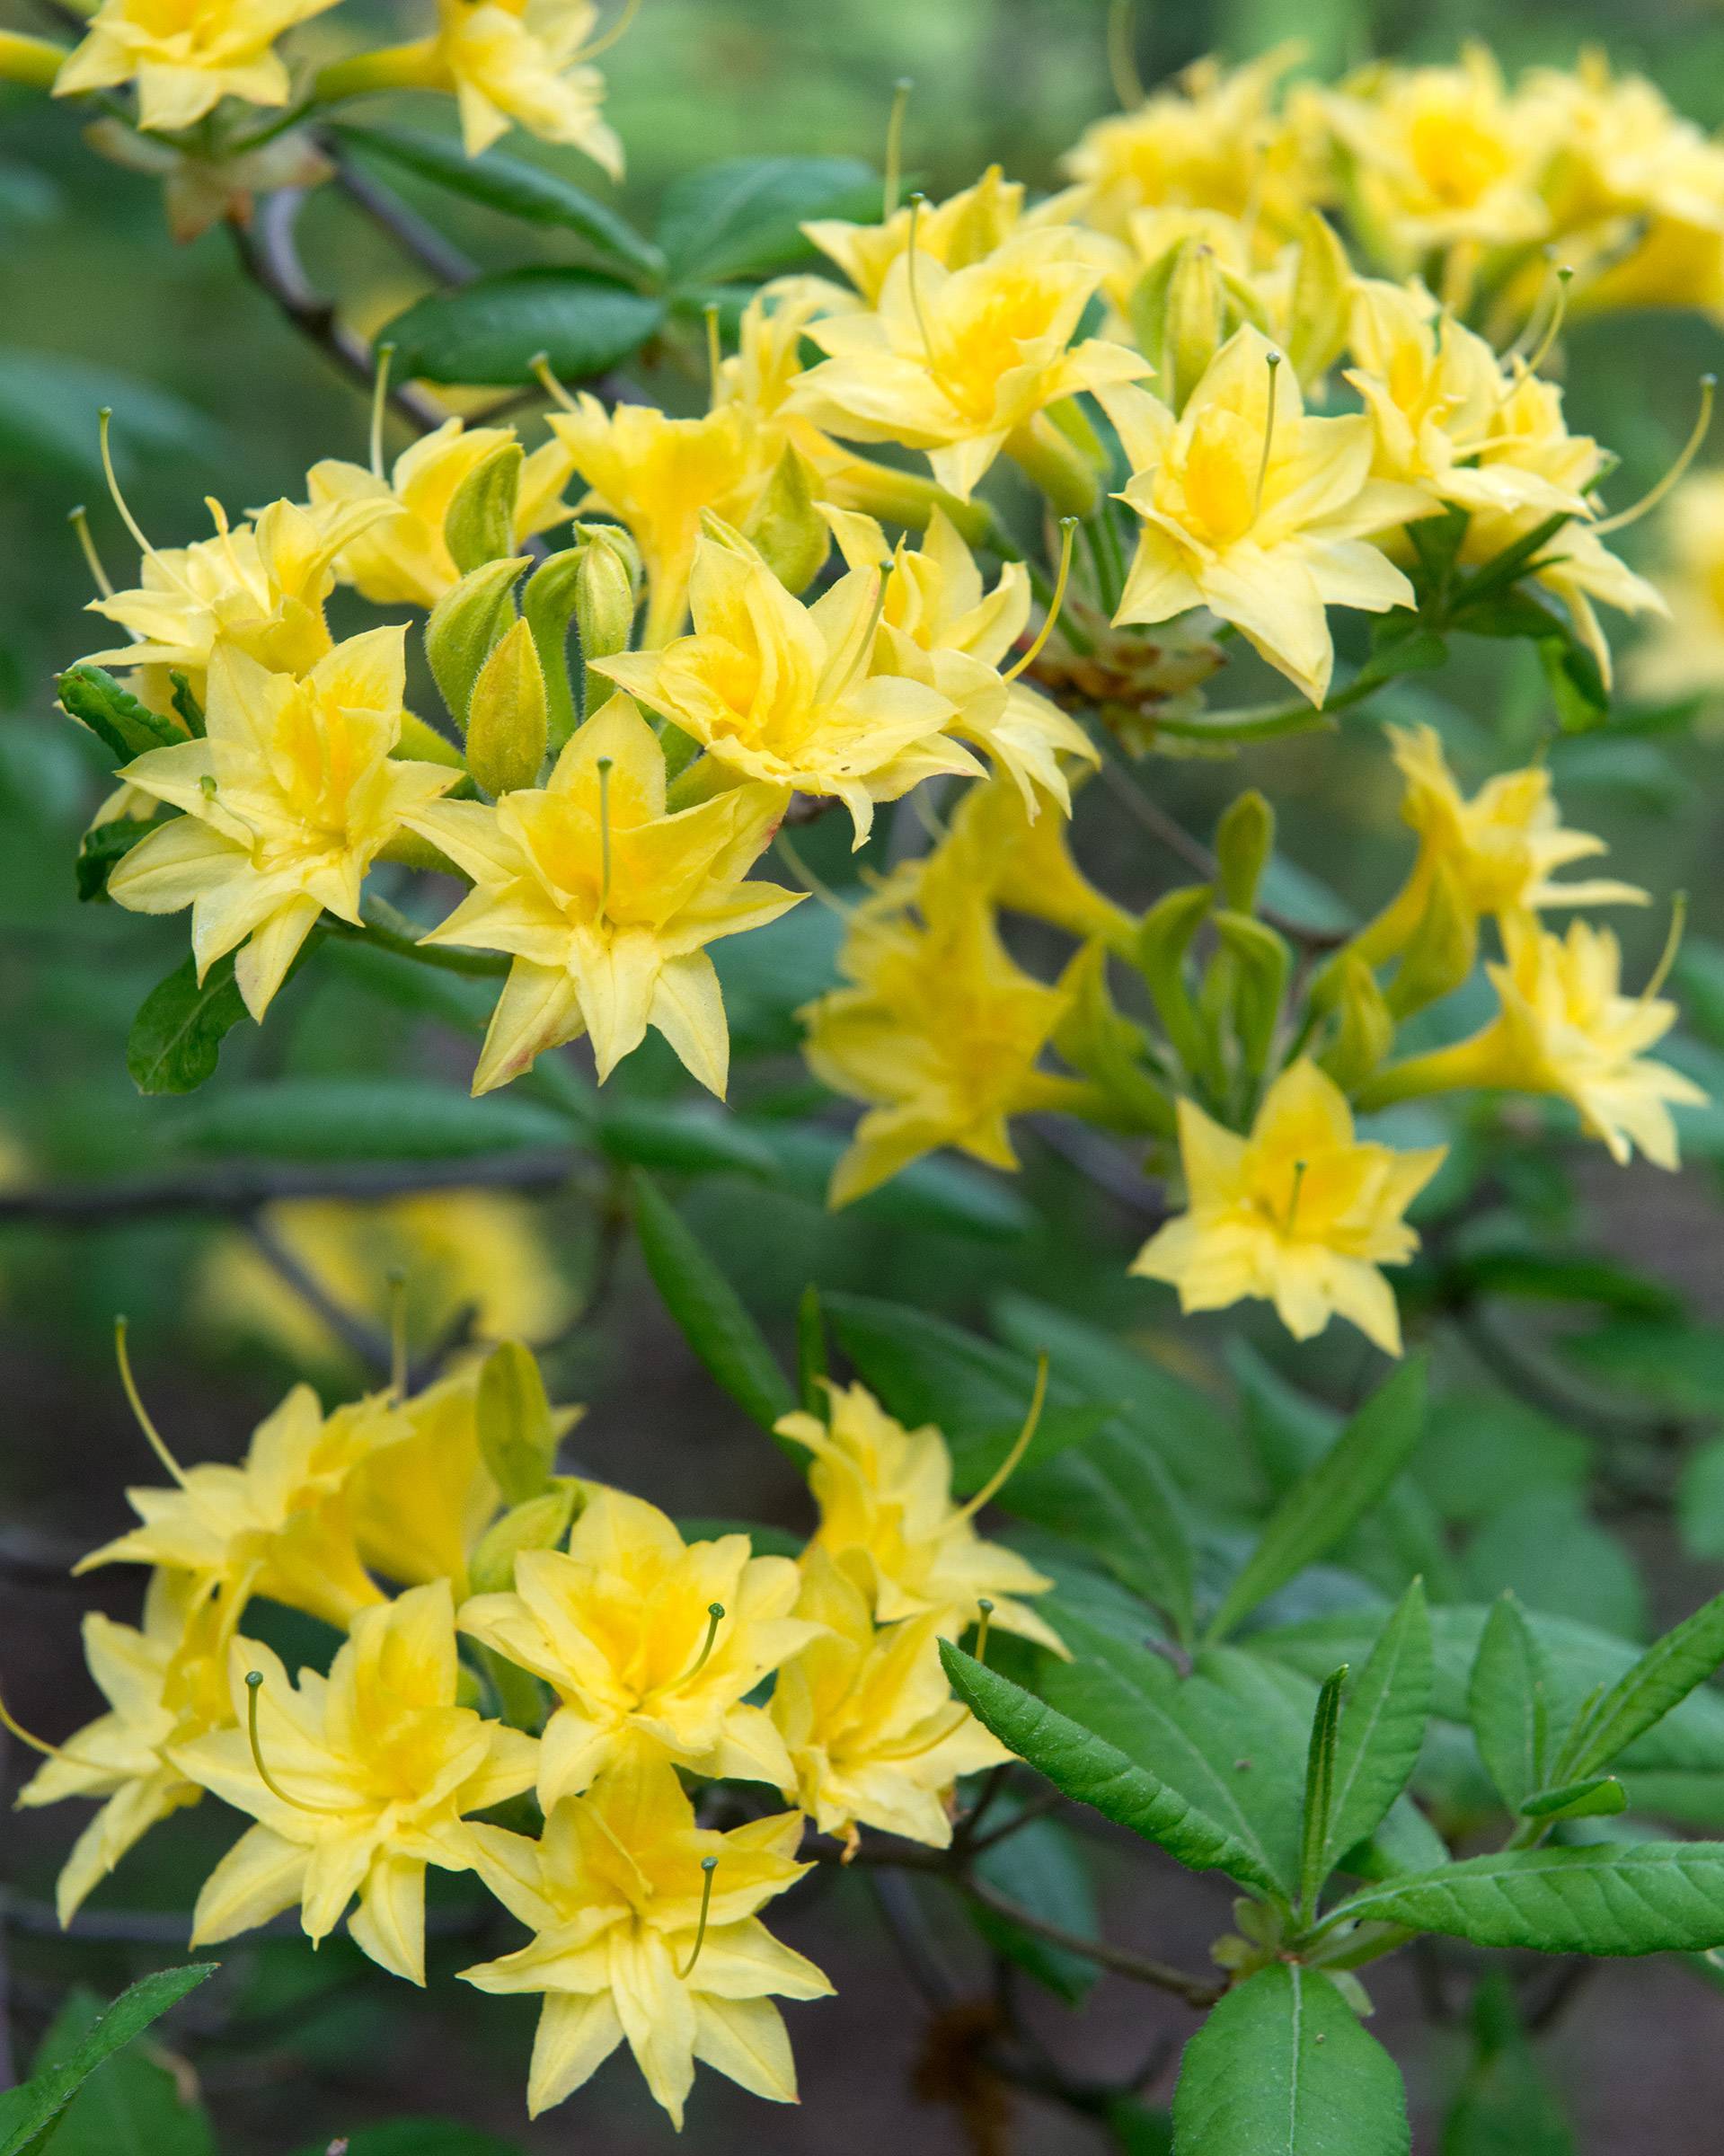 yellow flowers with yellow-green styles and green stigmas, green leaves and brown stems